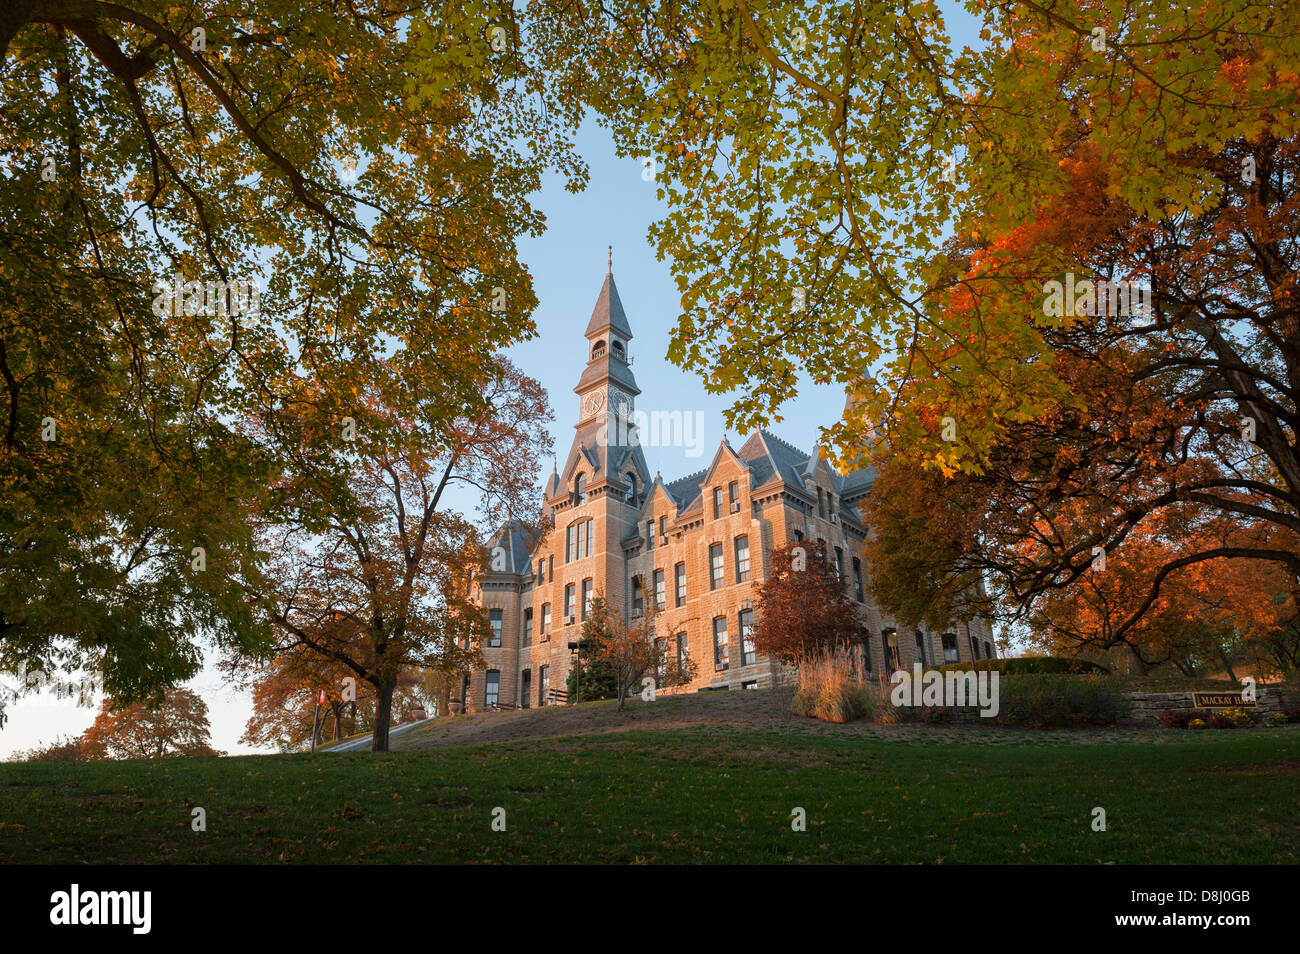 A 19th century college building surrounded by trees in Fall colors, photographed at sunset. Stock Photo